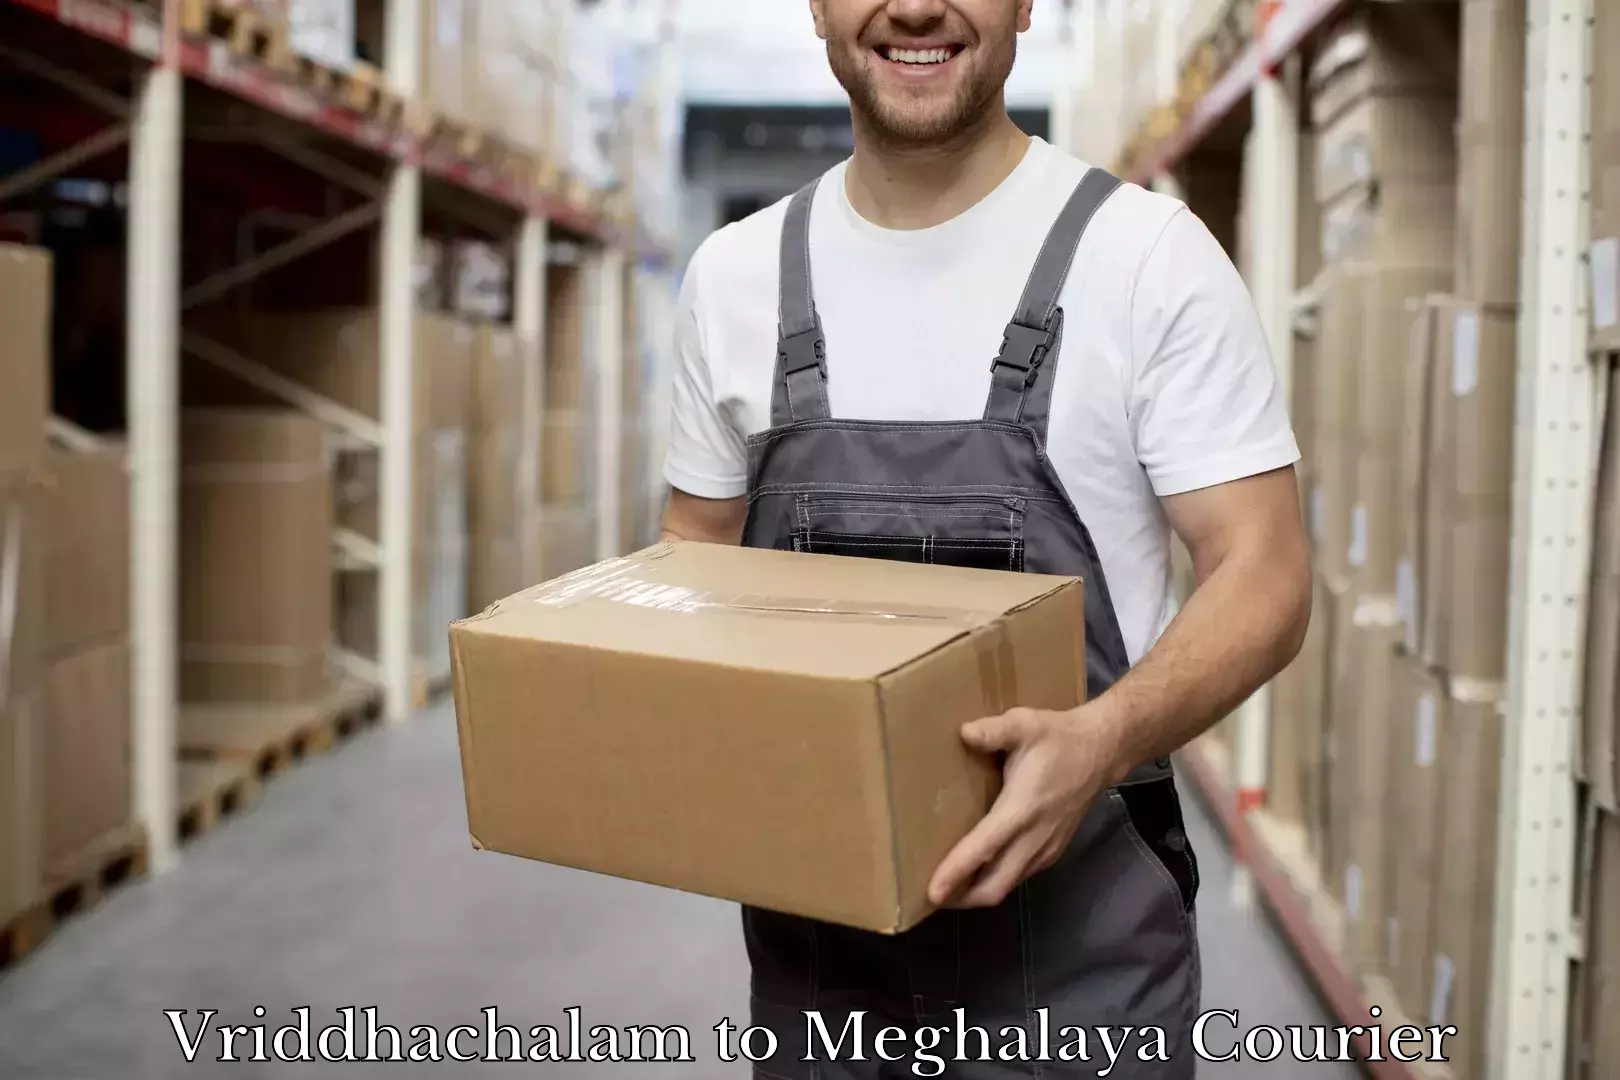 Luggage shipment specialists Vriddhachalam to Shillong